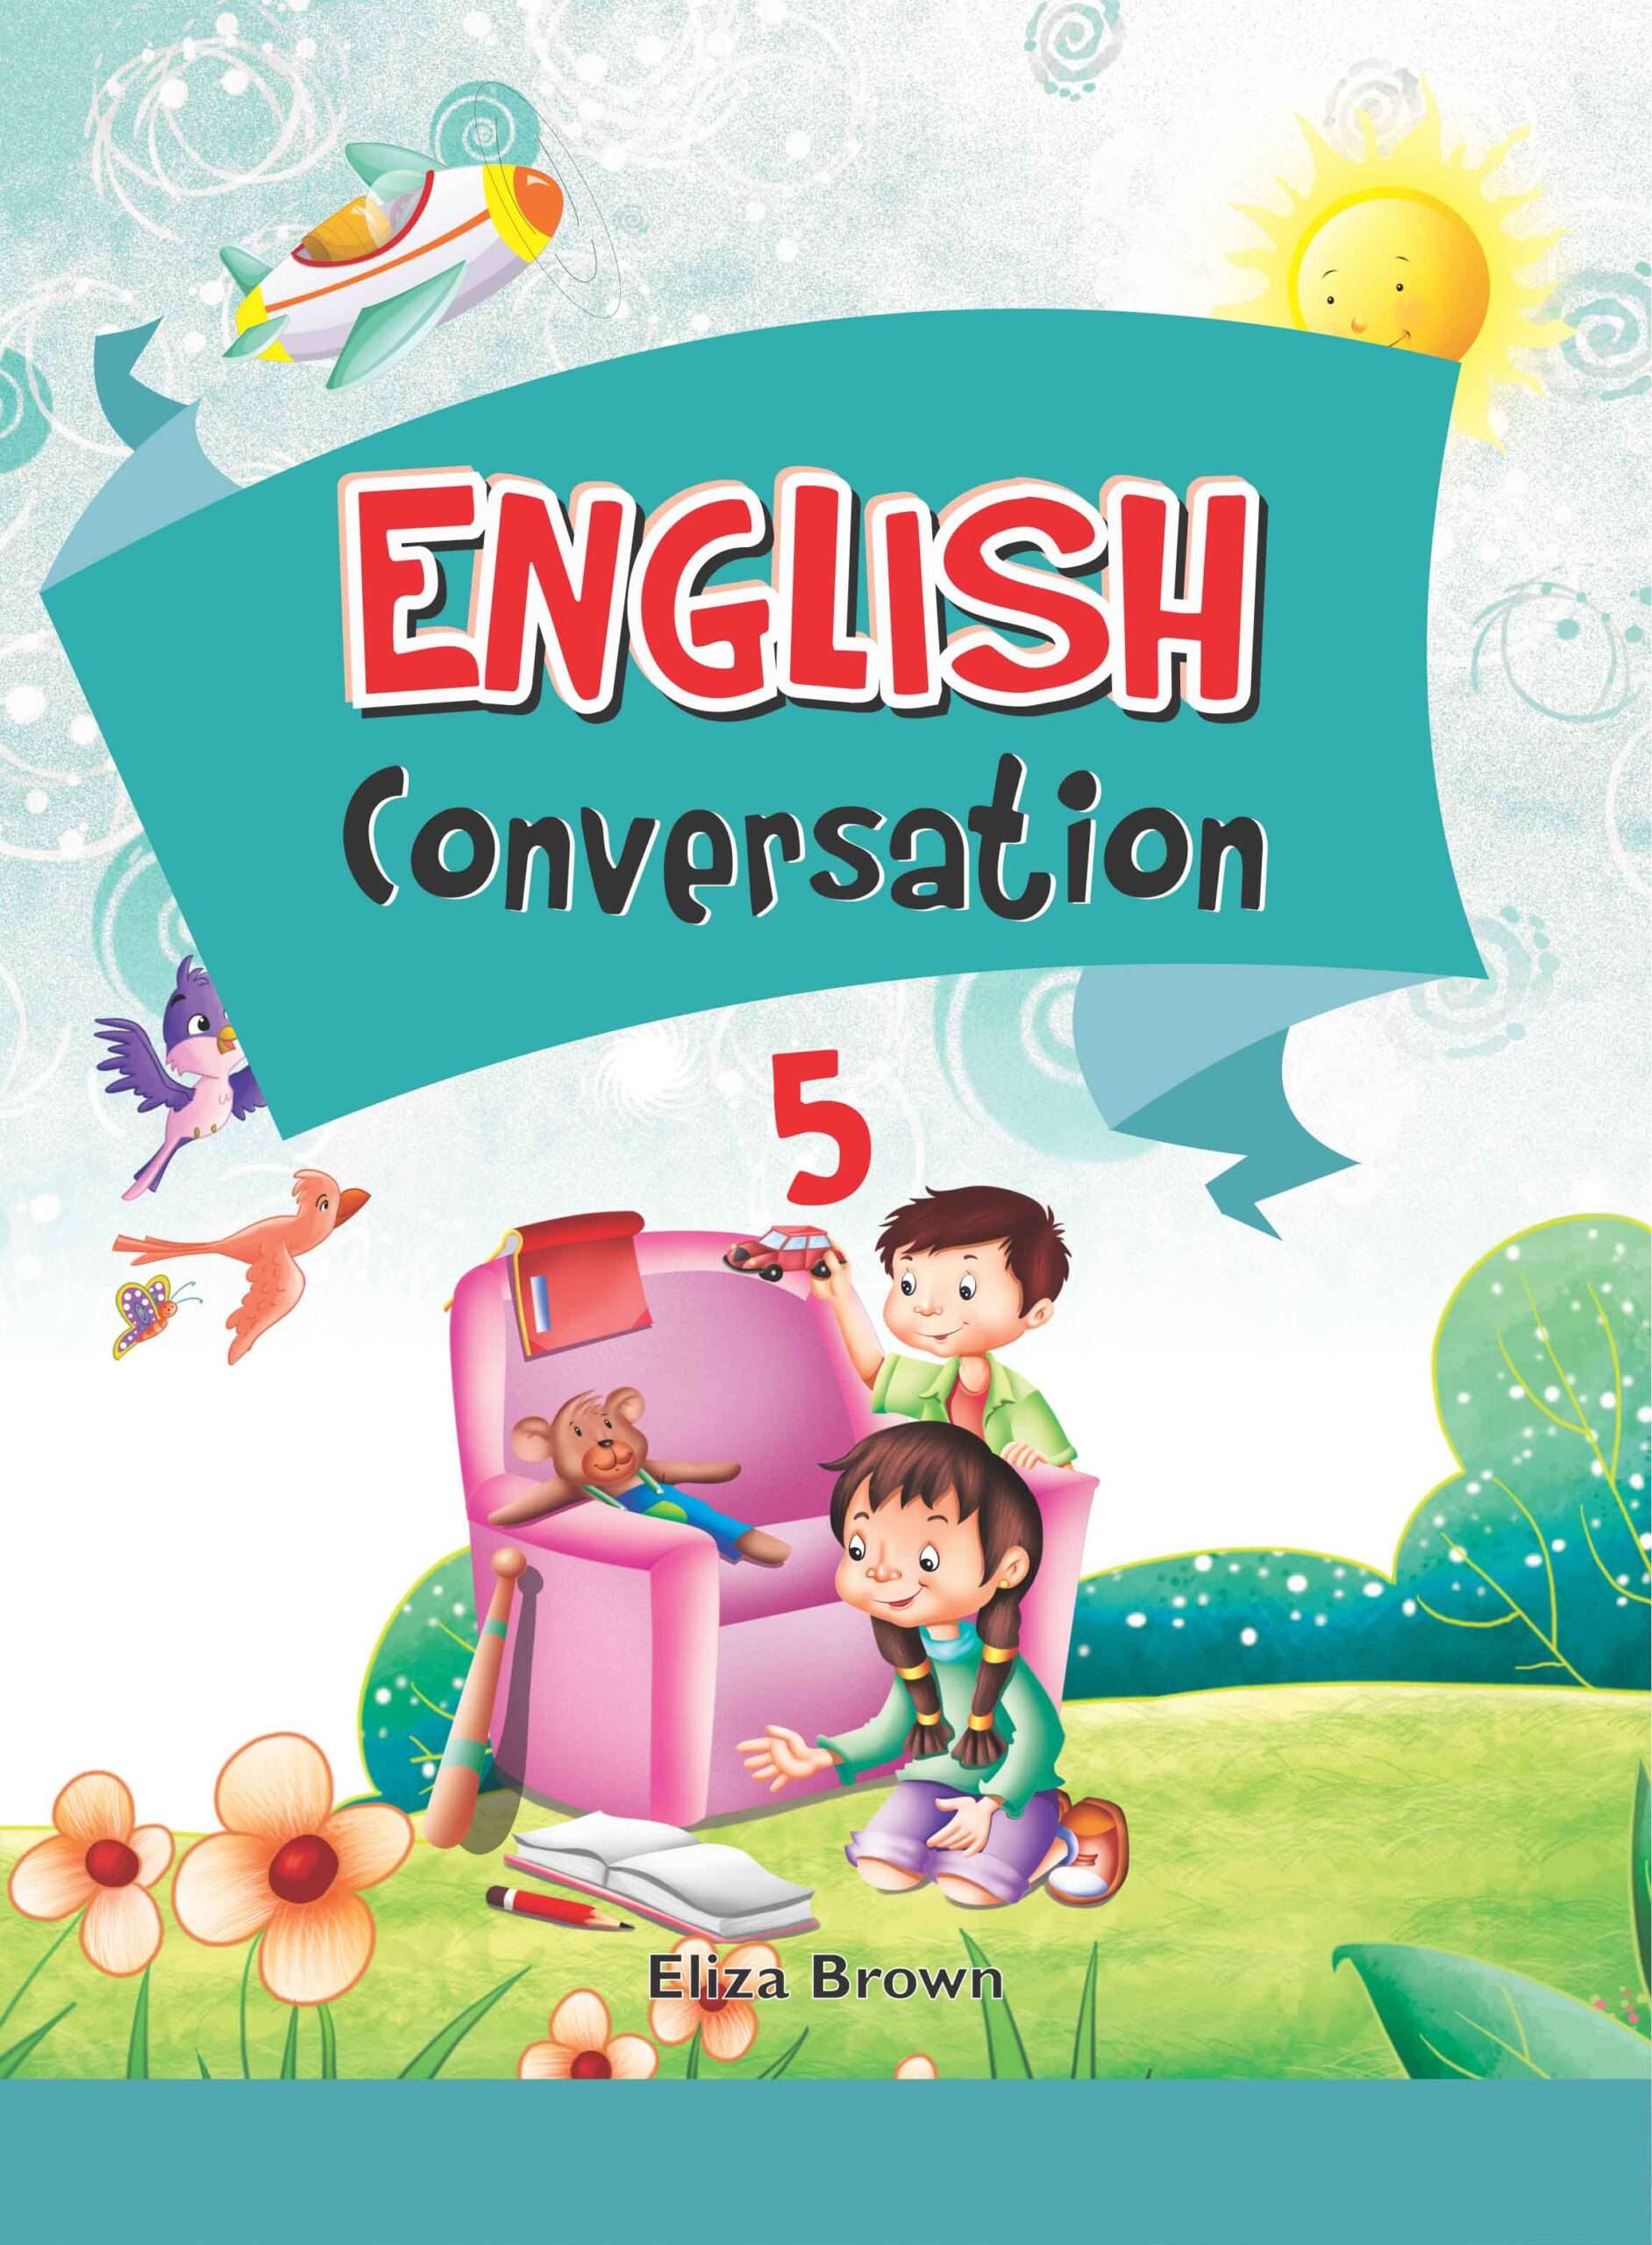 Buy English Conversation for 5